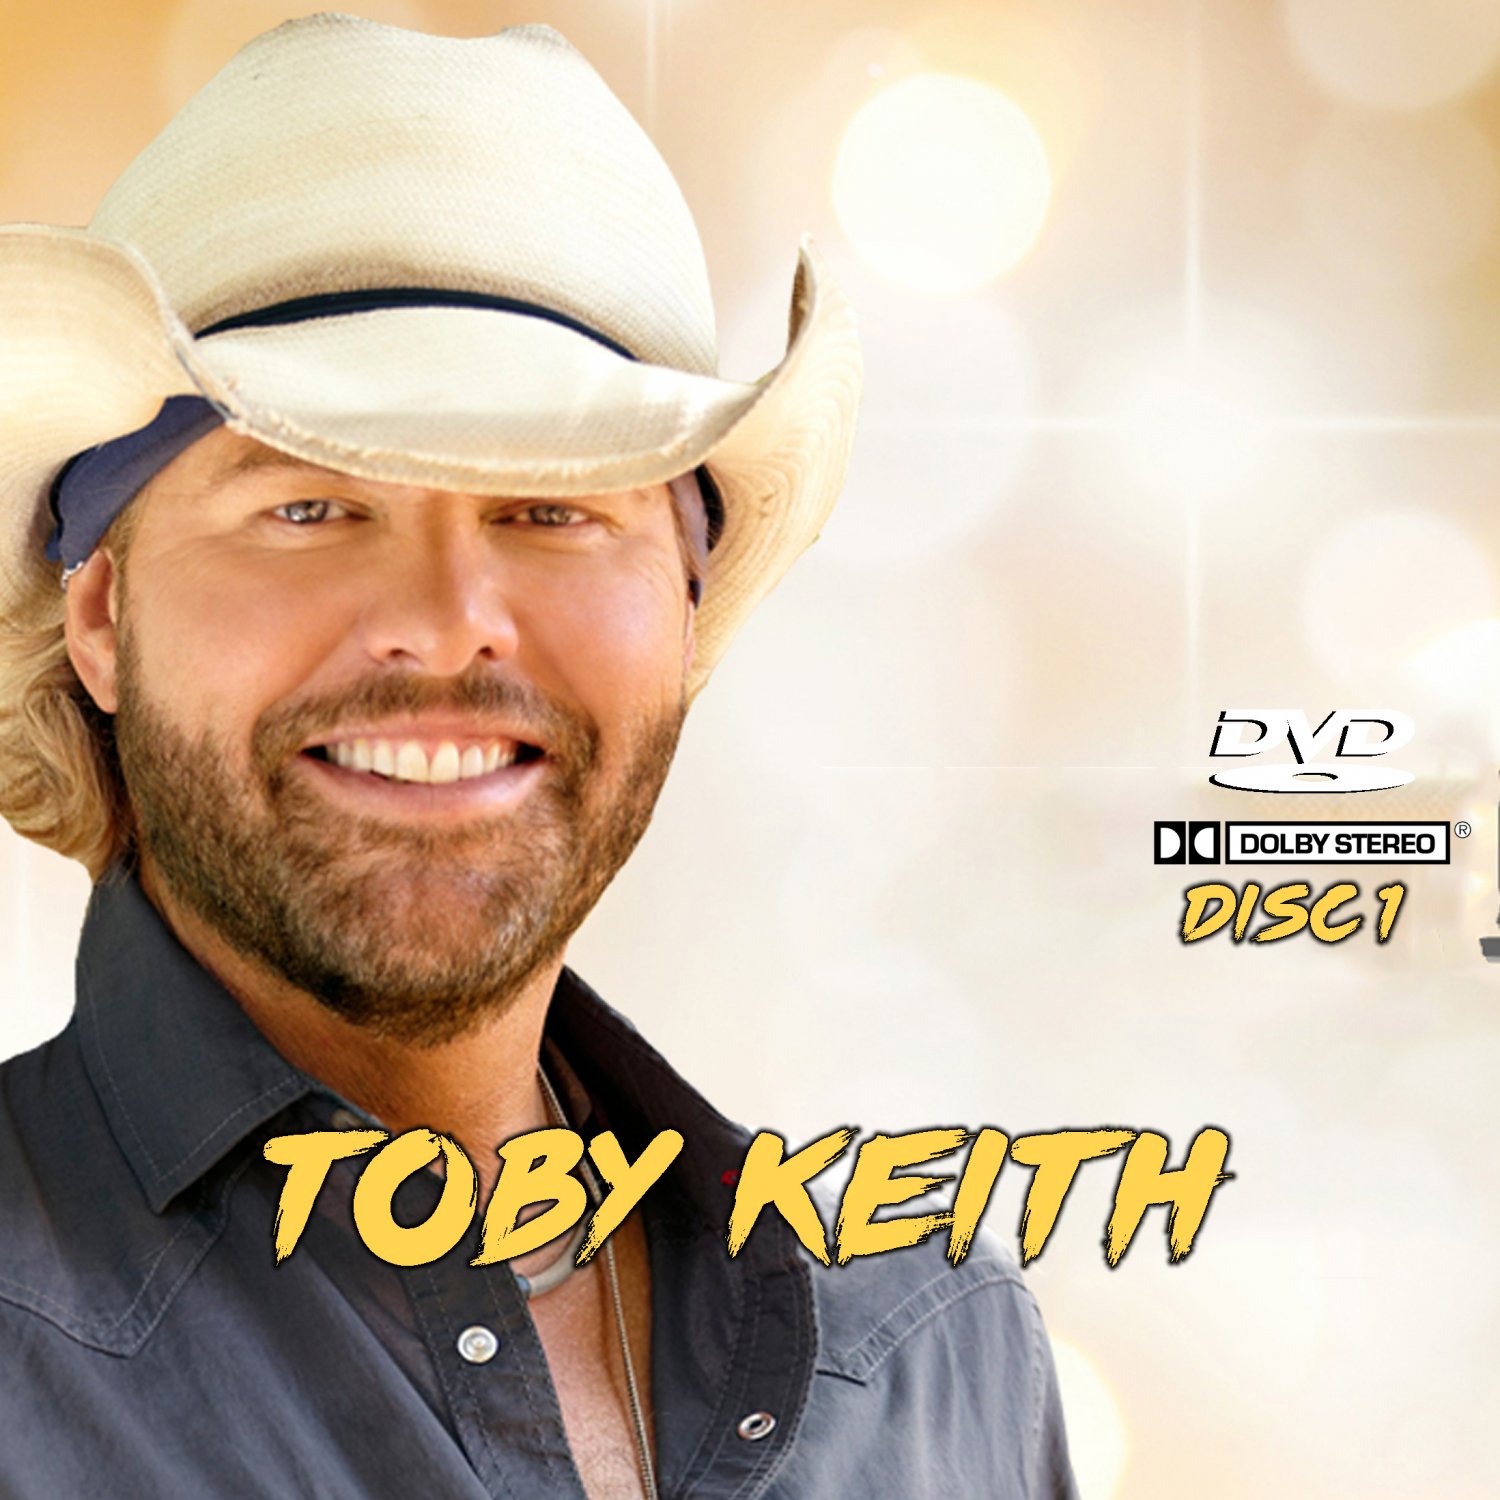 Toby Keith Music Videos Collection (3 DVD's) 56 Music Videos